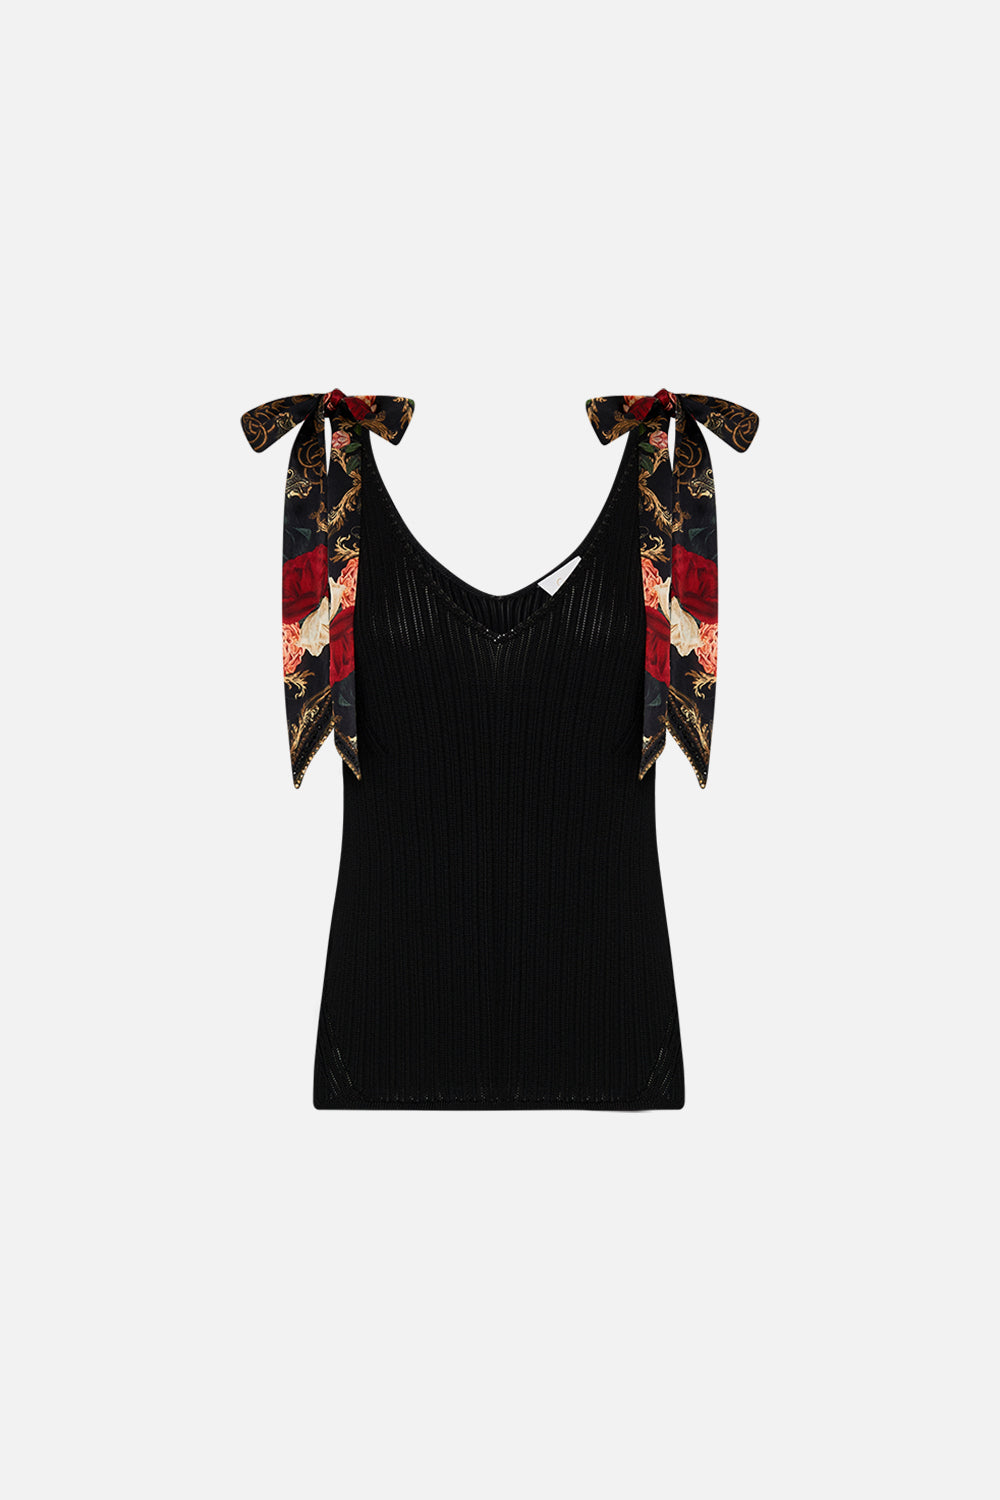 CAMILLA Black Knit Top with Silk Bow Detail in Magic in the Manuscripts print